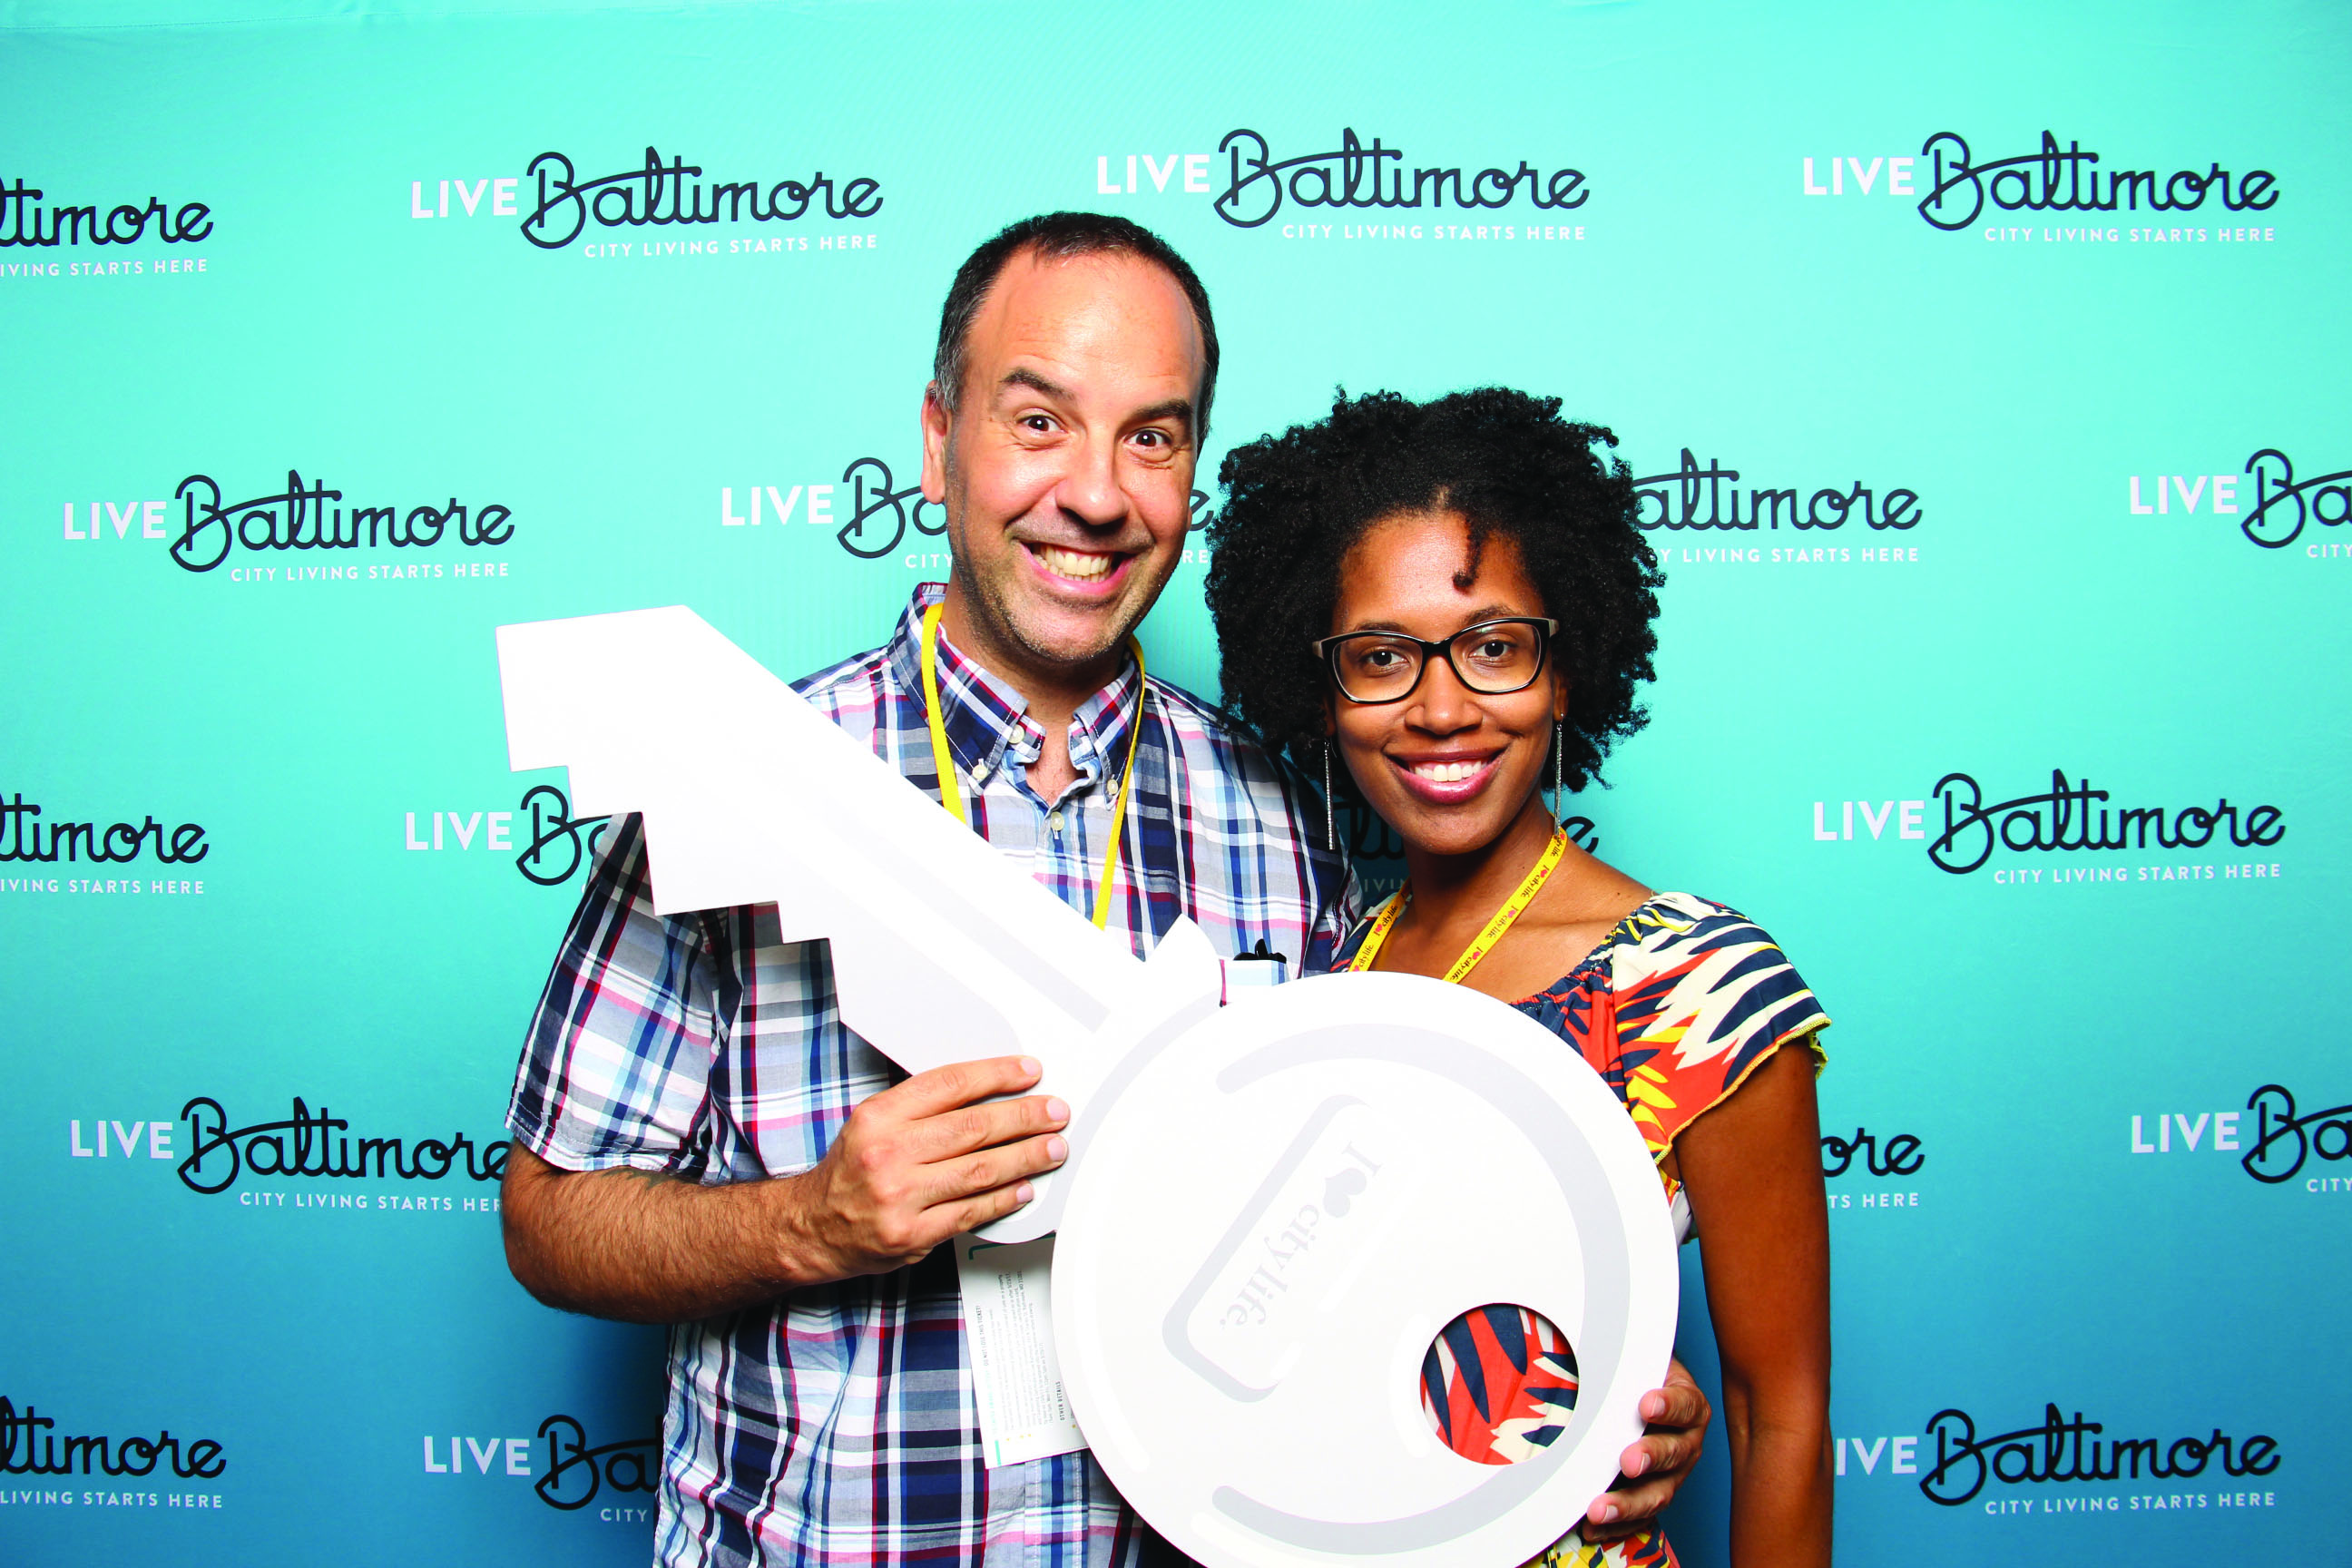 Couple Holding Large Key at Live Baltimore Event